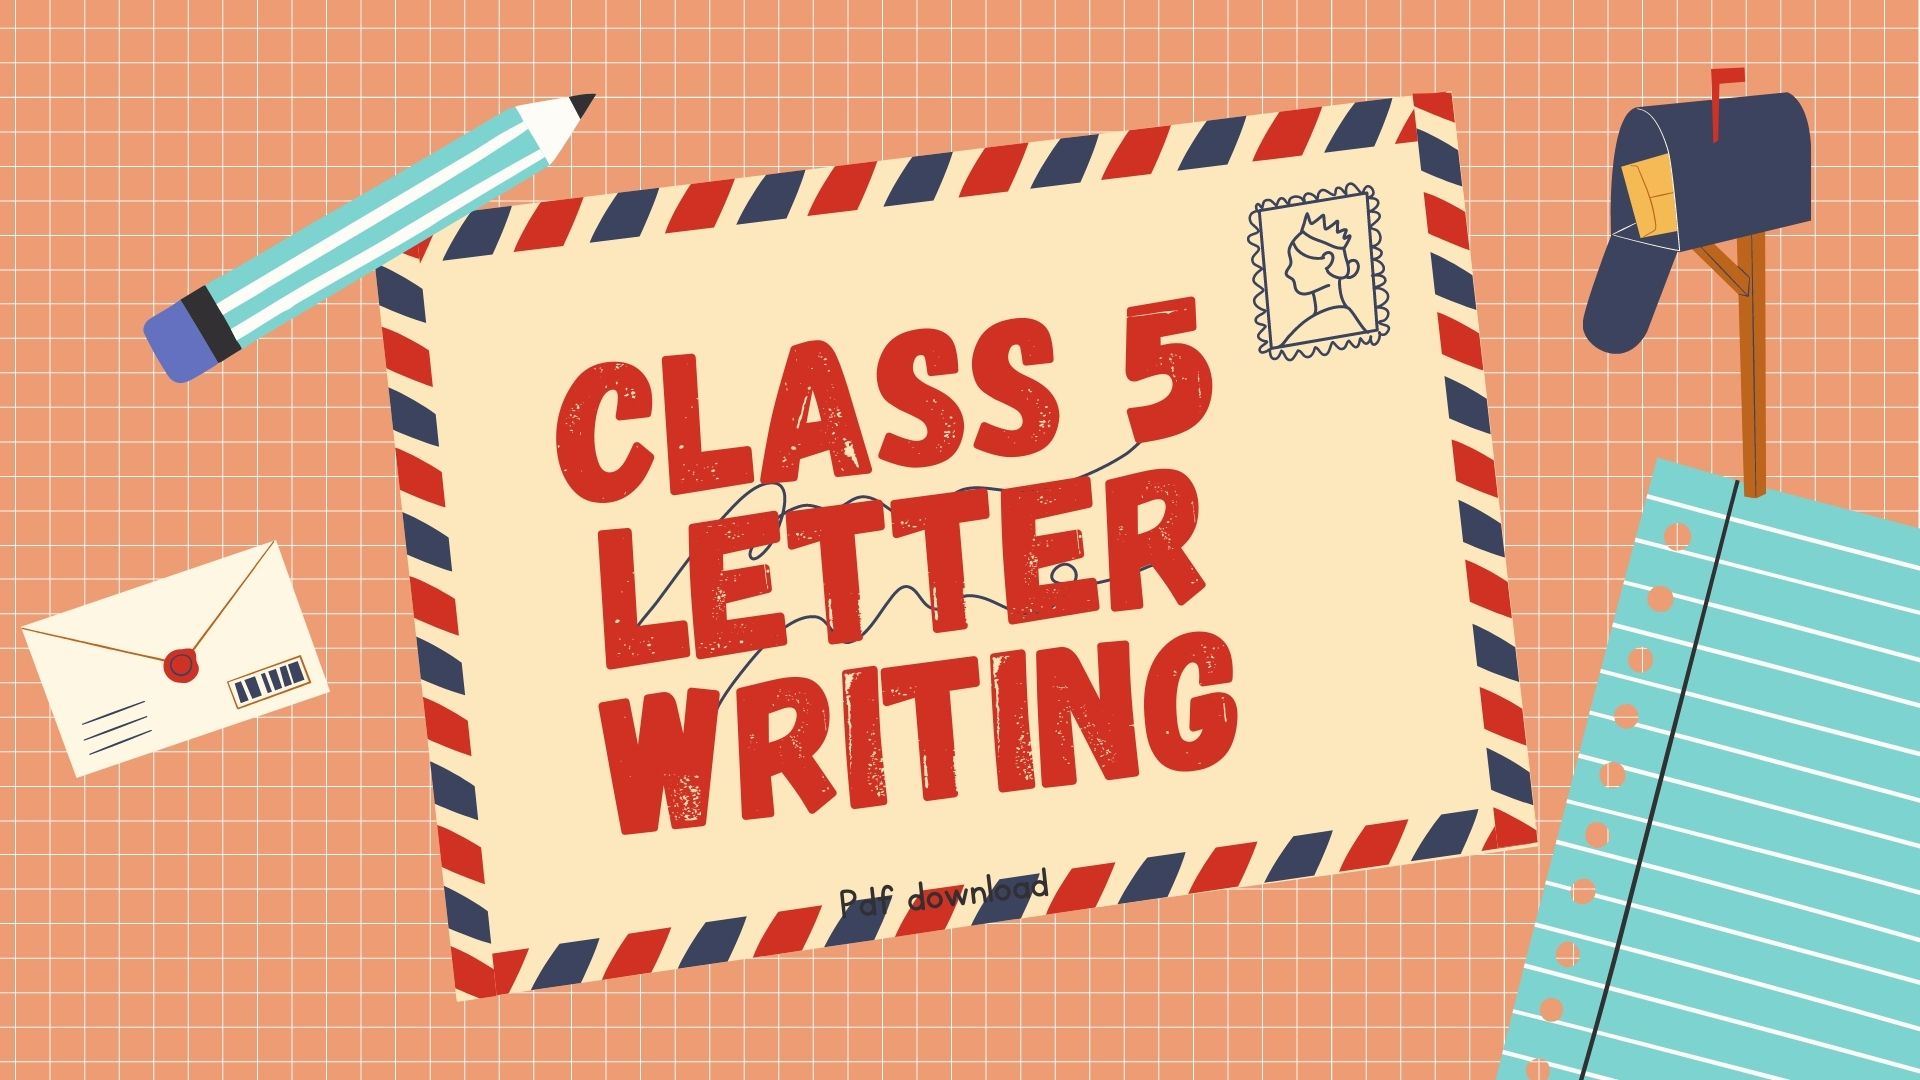 Class 5 letter writing